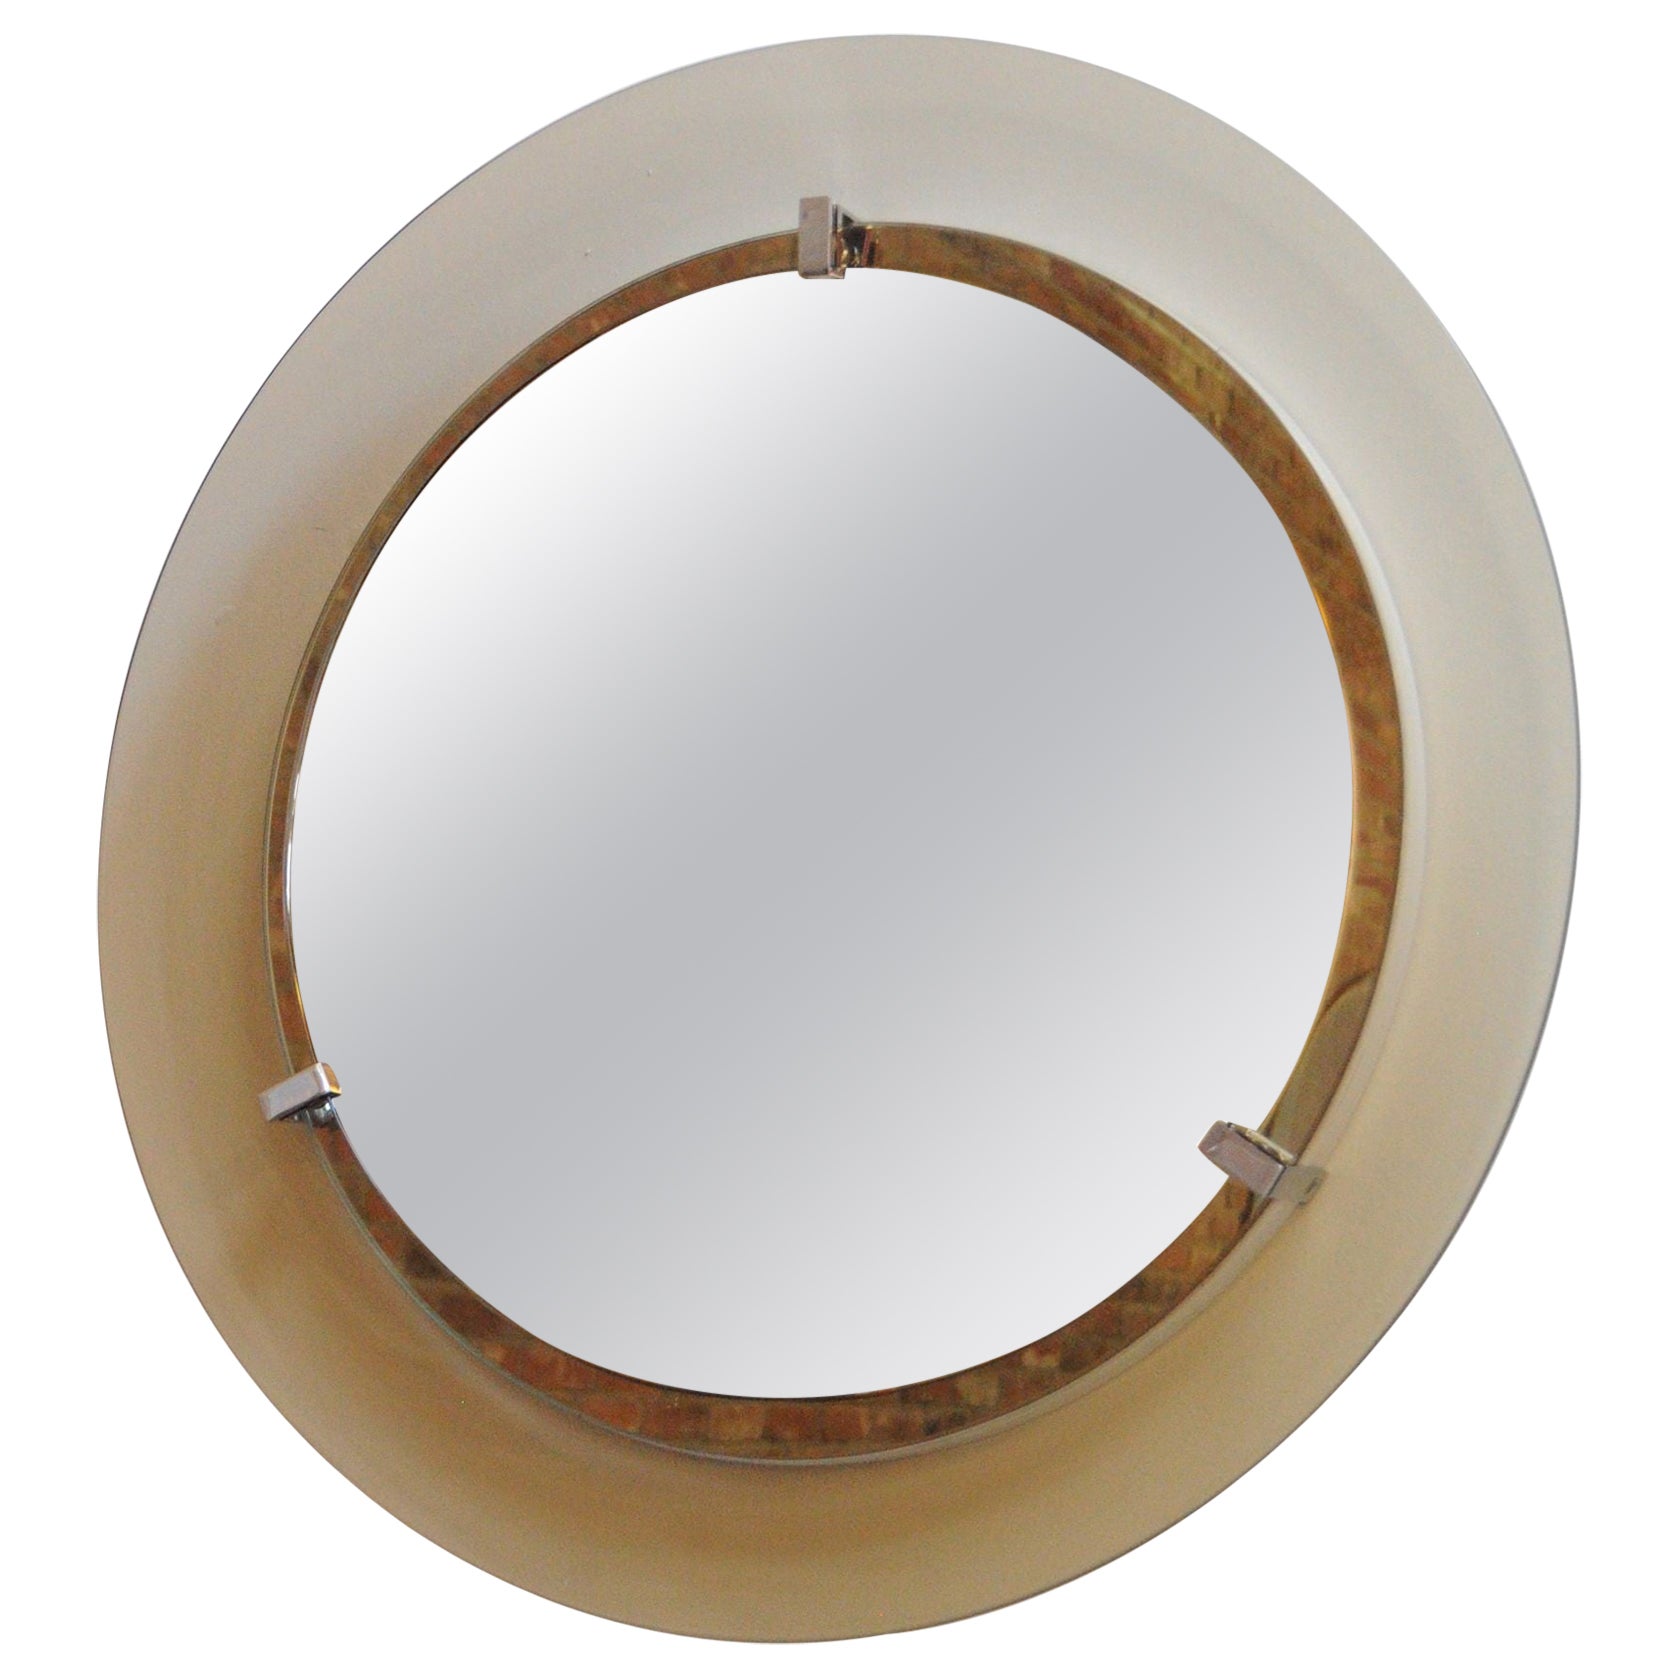 Italian Modernist Smoked Glass Circular Wall Mirror by Veca For Sale